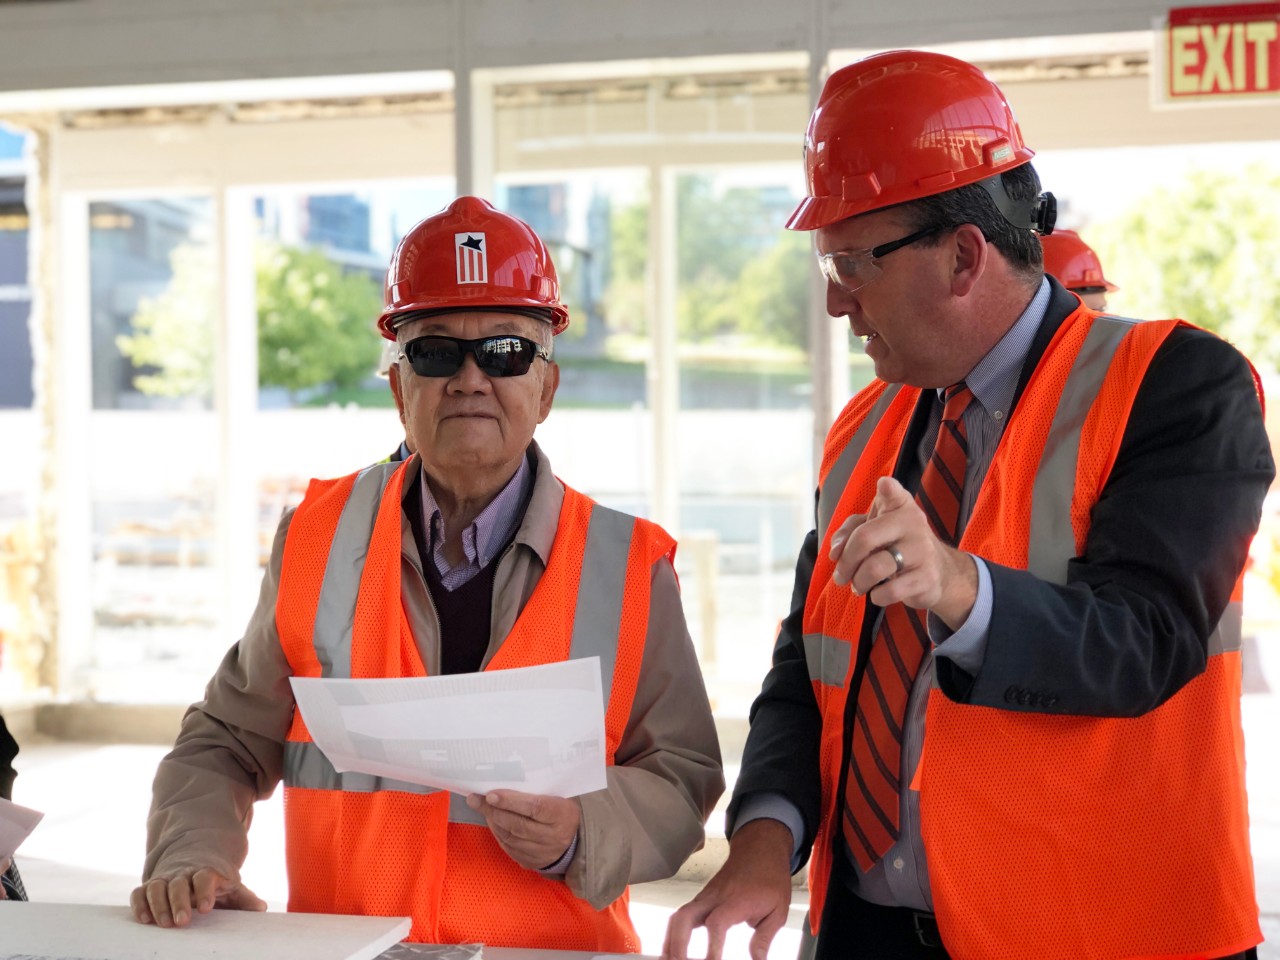 Kwang G. Tan, left, touring the construction site of the National Veterans Resource Center at the Daniel and Gayle D’Aniello Building.